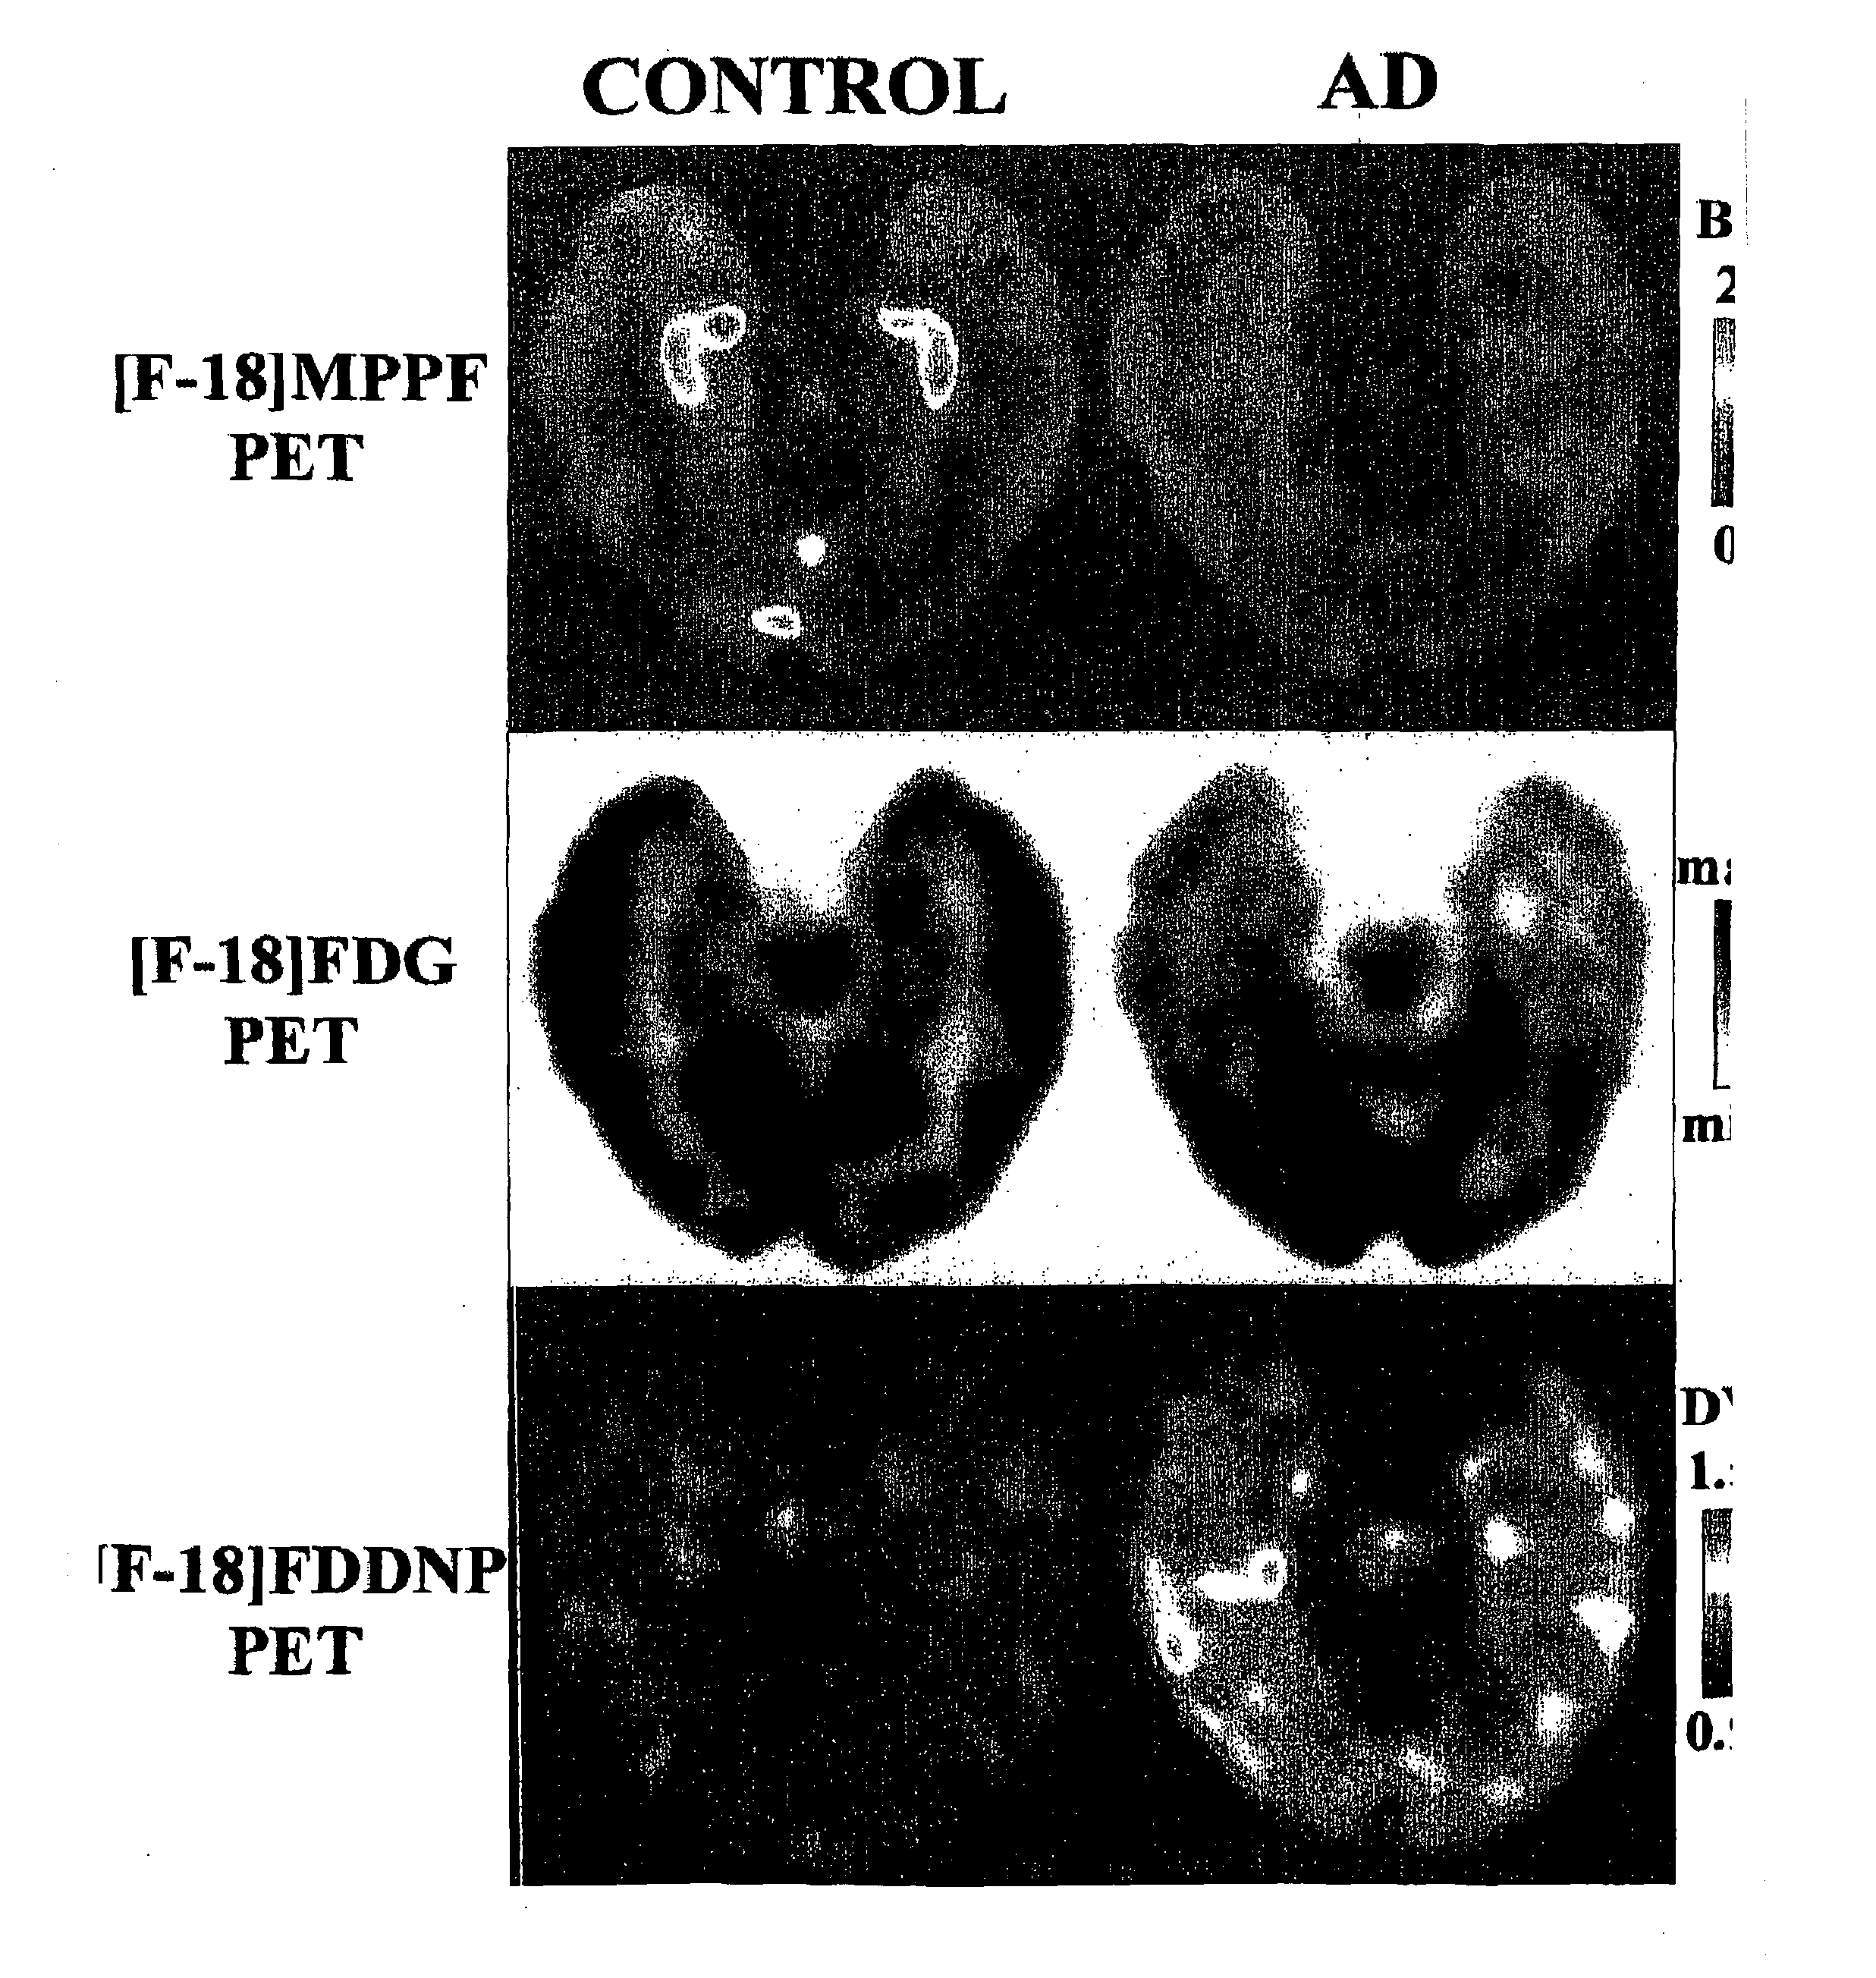 Method for Detecting Alzheimer's Disease and other Forms of Dementia, and Measuring Their Progression